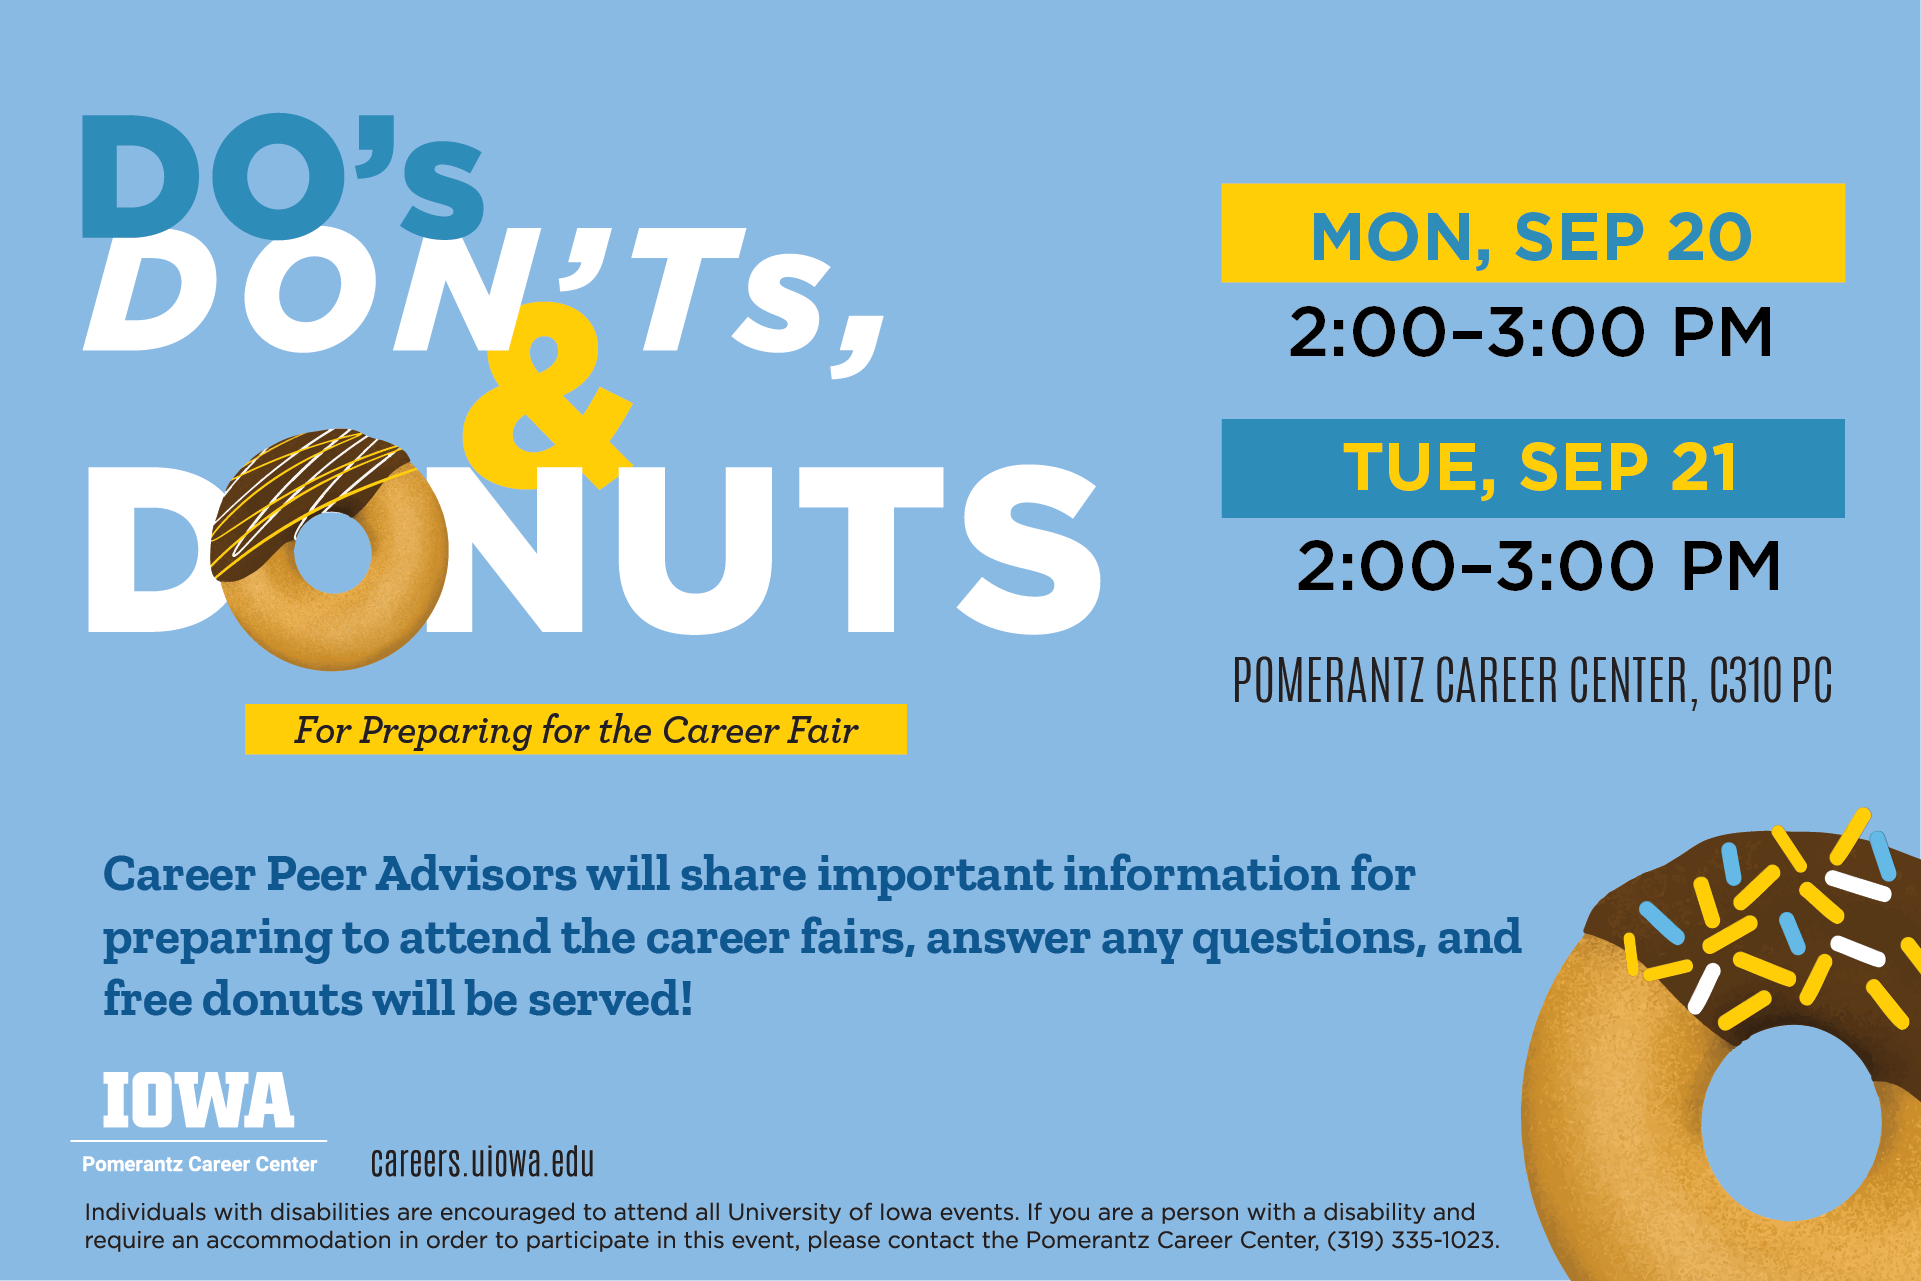 Come to C310 PC for Do's Don't And Donuts. Eat a donut while learning about how to interact with employers at the job fair. Sep 20 or Sep 21 2 to 3 p.m.